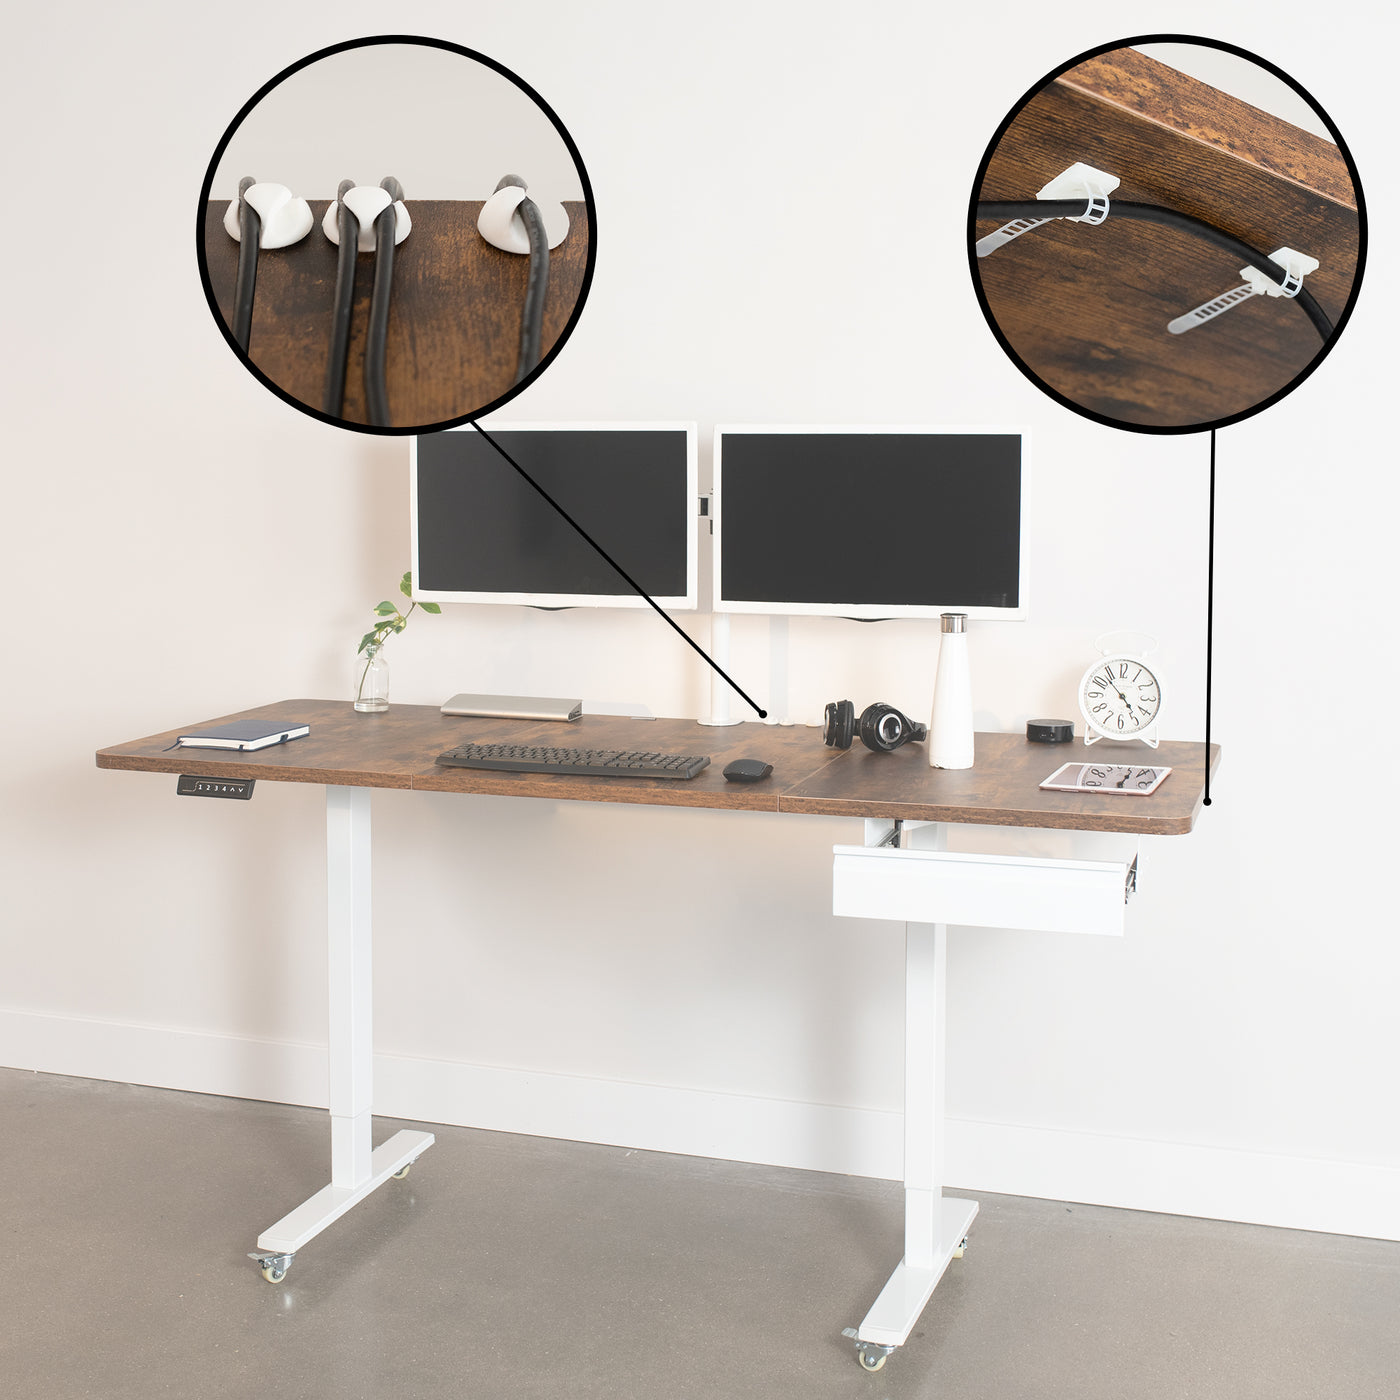 Desk Accessory Kit which includes a sturdy steel drawer for extra storage space, M8 caster wheels (x4) for smooth mobility, and cable management ties for organization.